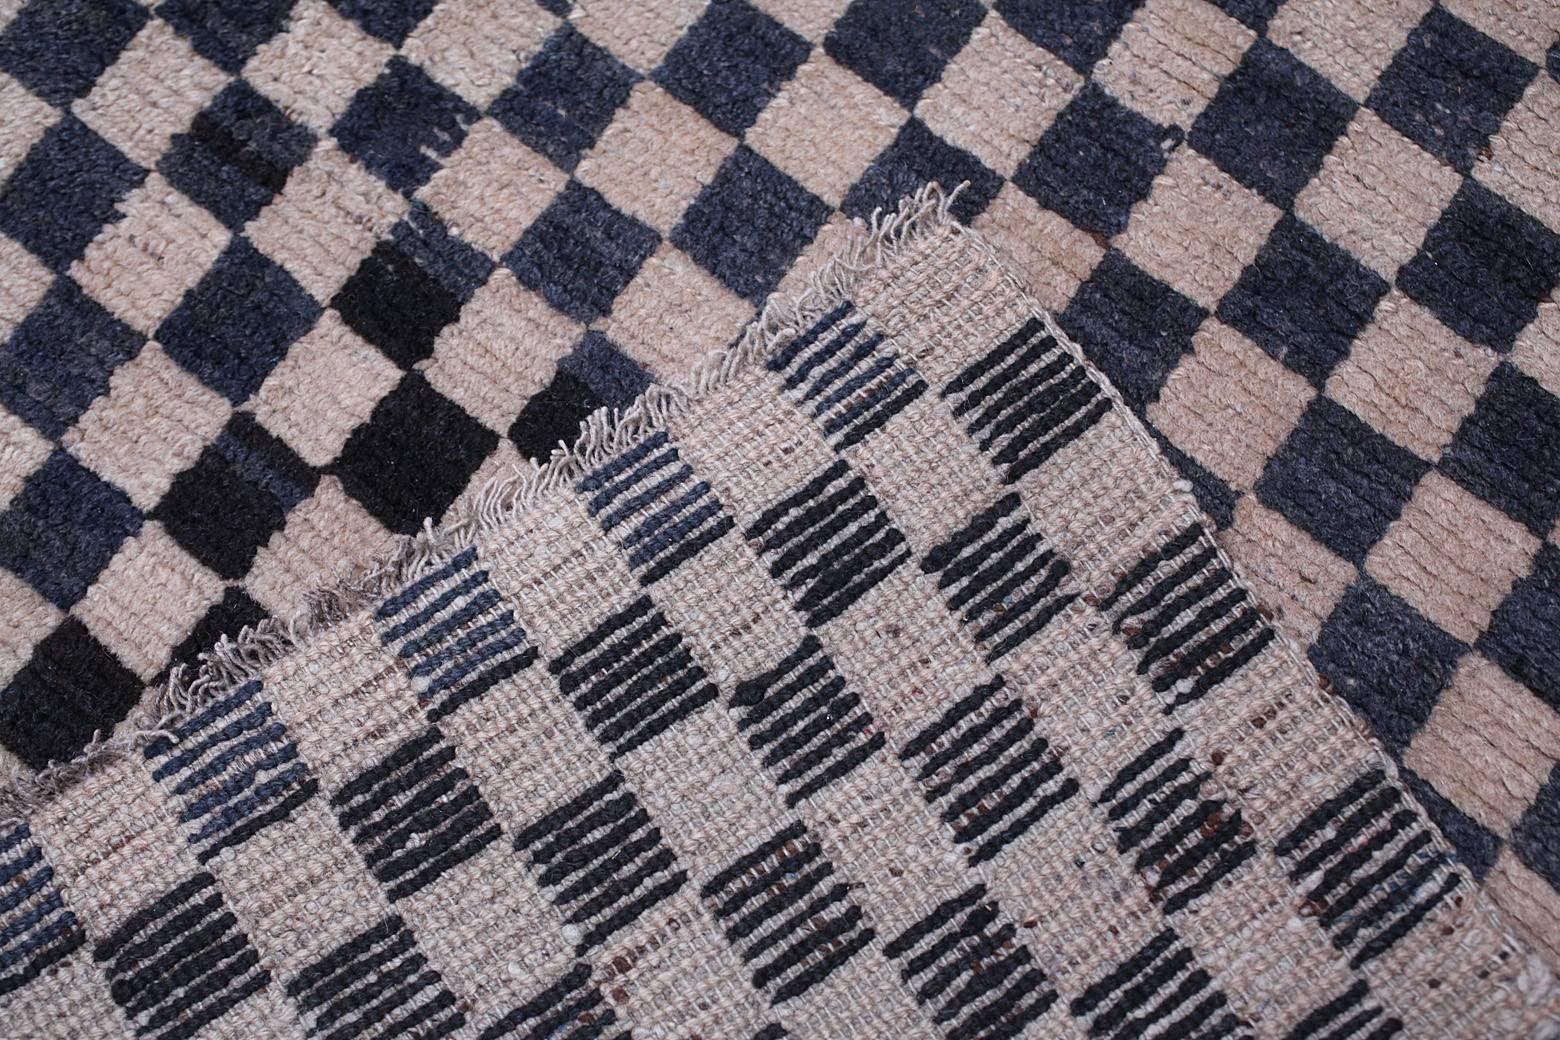 ******Autumn sale ******
This stunning Tibetan checkerboard rug was traditionally used as a meditation mat. 

The simple design is composed of blue and white squares, made with Tibetan highland wool. The white comes from undyed wool whilst the blue